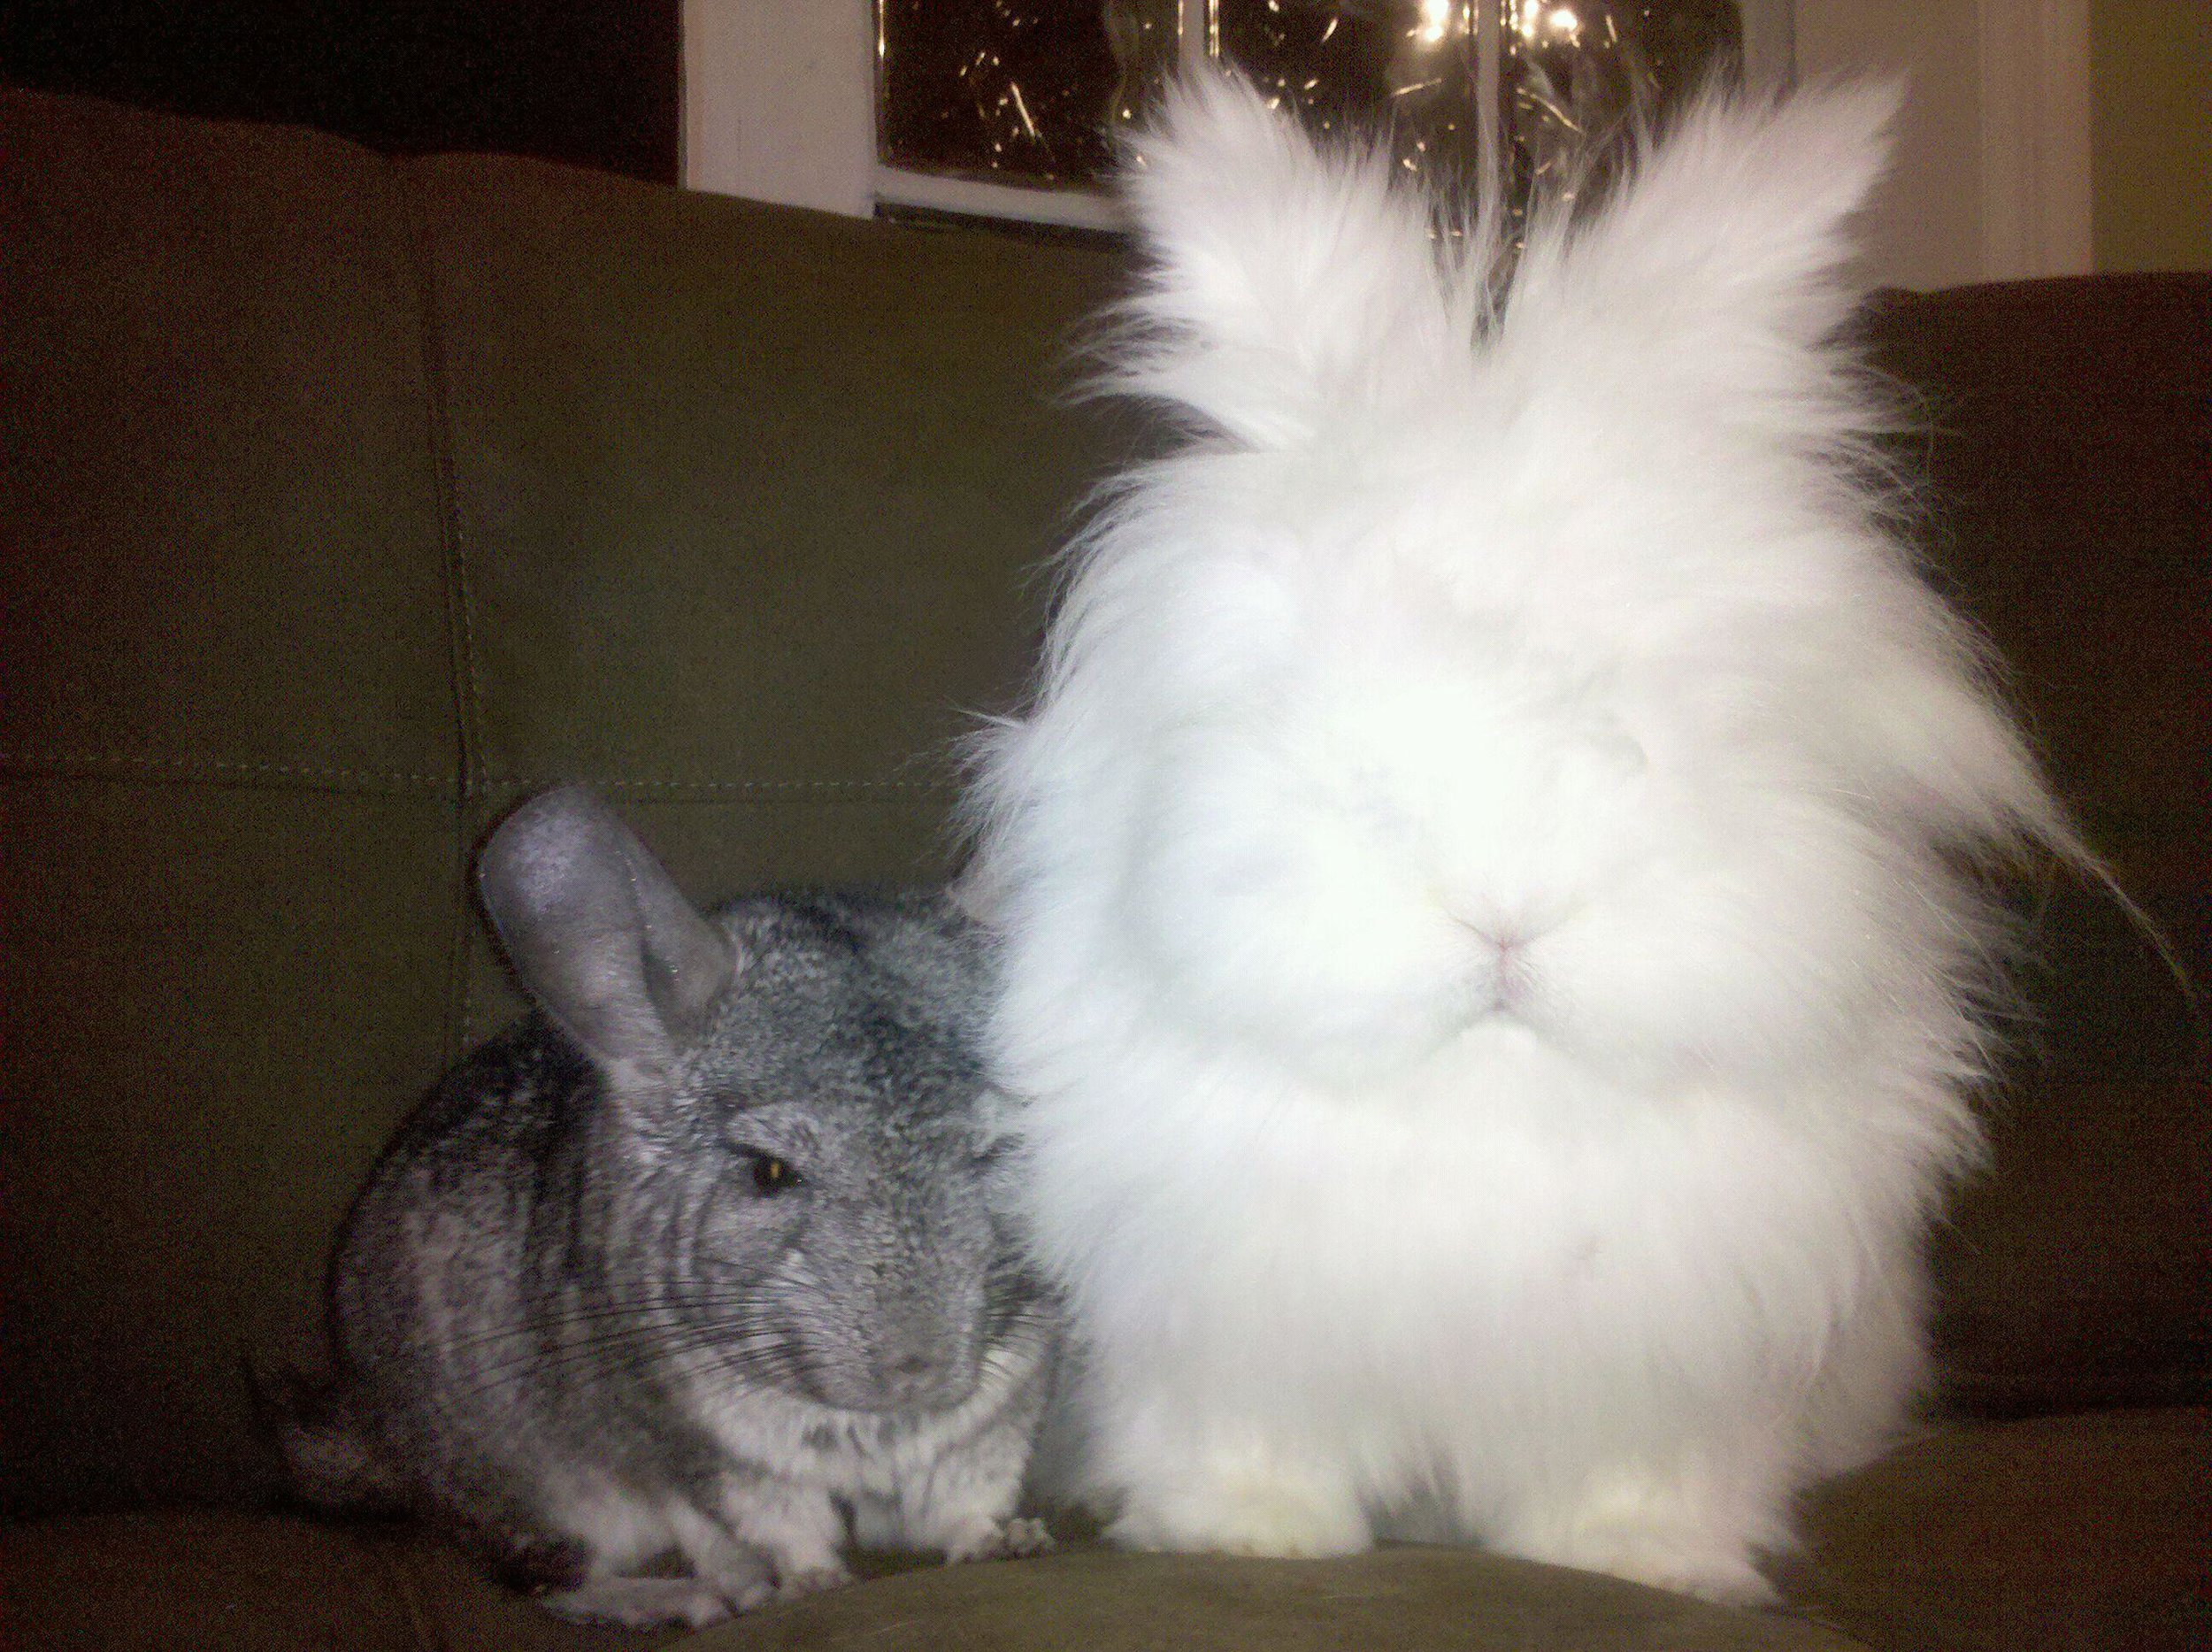 Fluffy Bunny and His Chinchilla Friend Sit Together Quietly